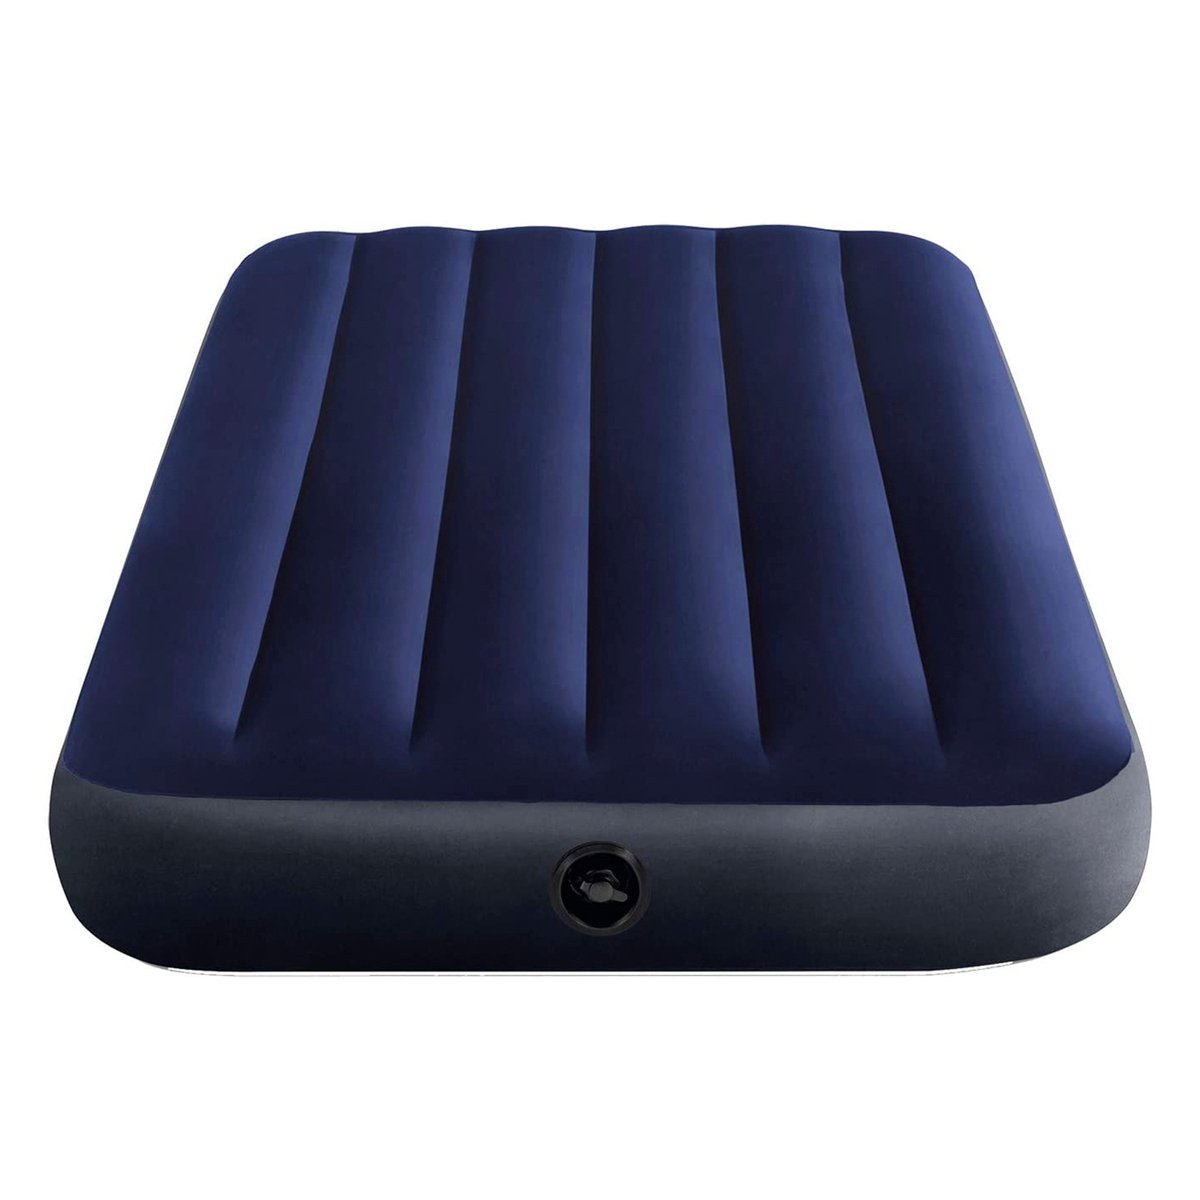 Intex Inflatable Bed 64757